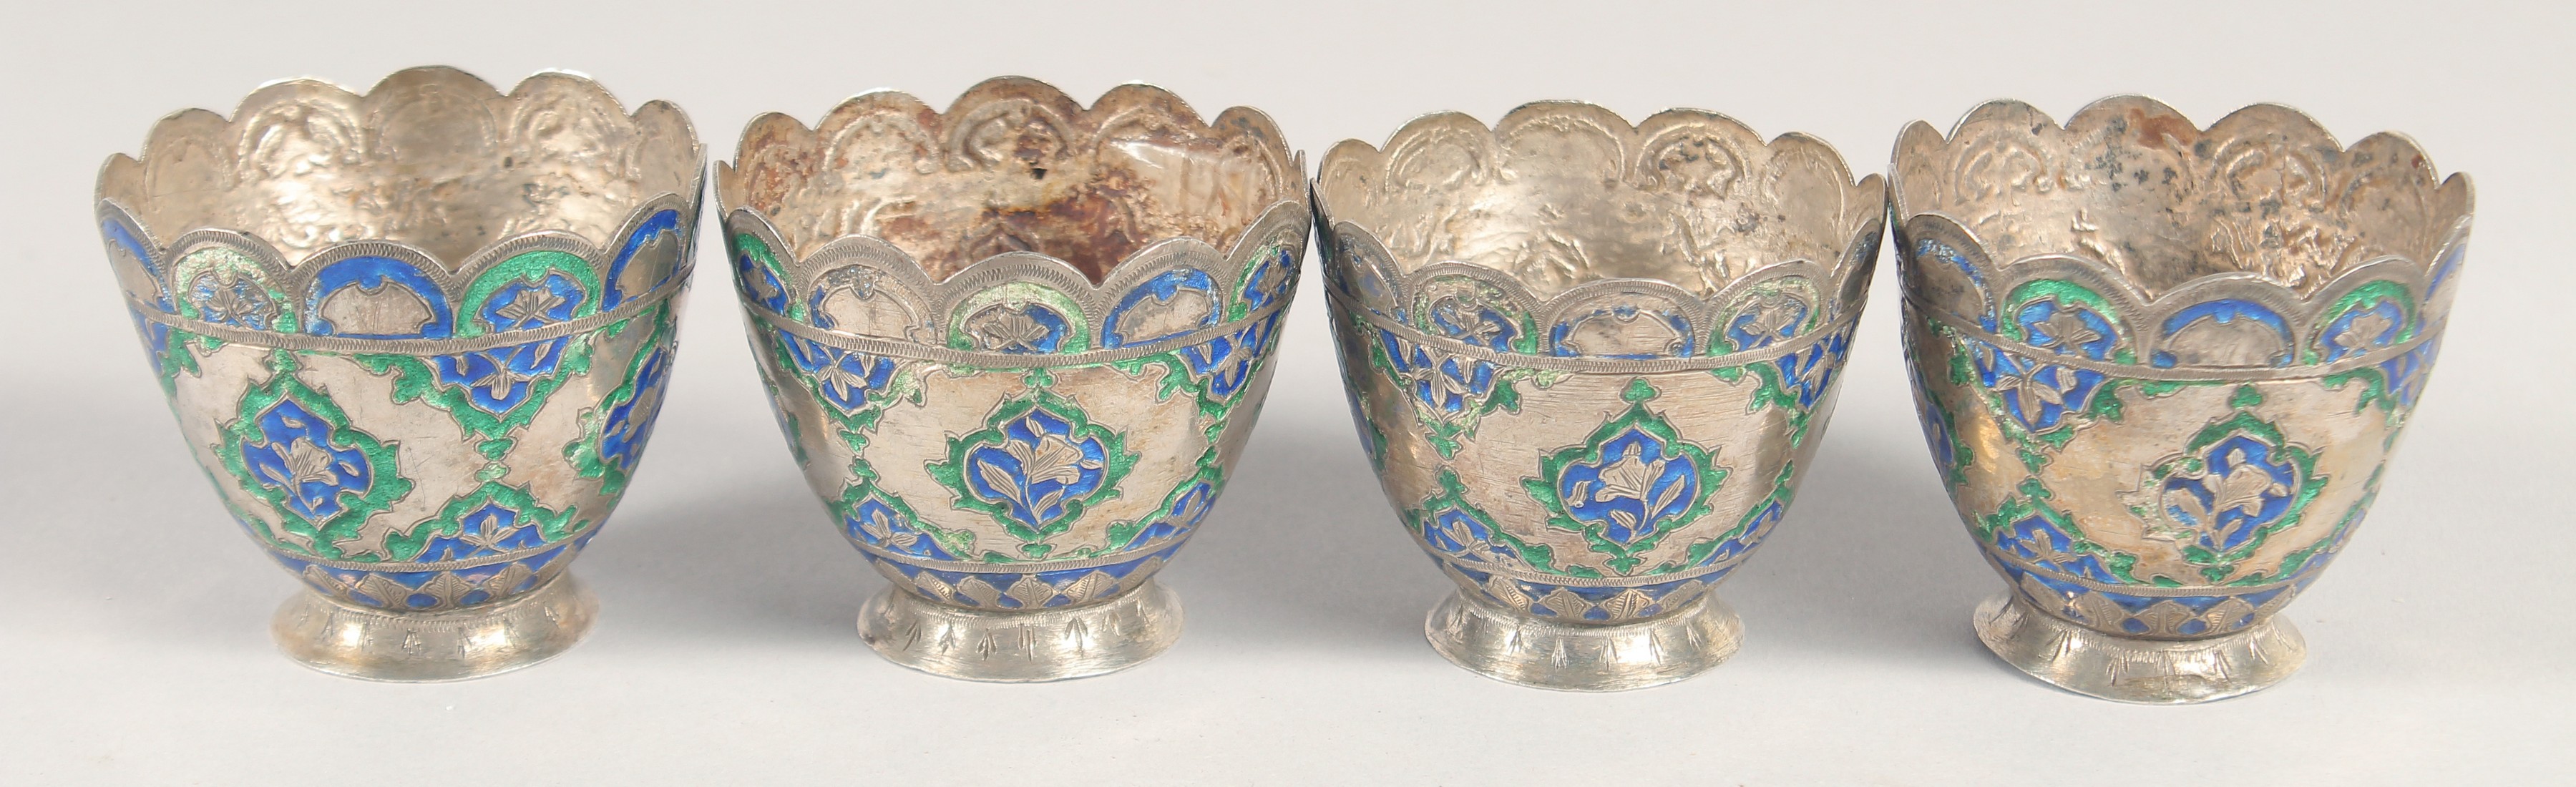 A FINE SET OF FOUR 18TH-19TH CENTURY INDIAN LUCKNOW ENAMELLED SILVER CUPS, 5.5cm diameter, (4). - Image 2 of 5